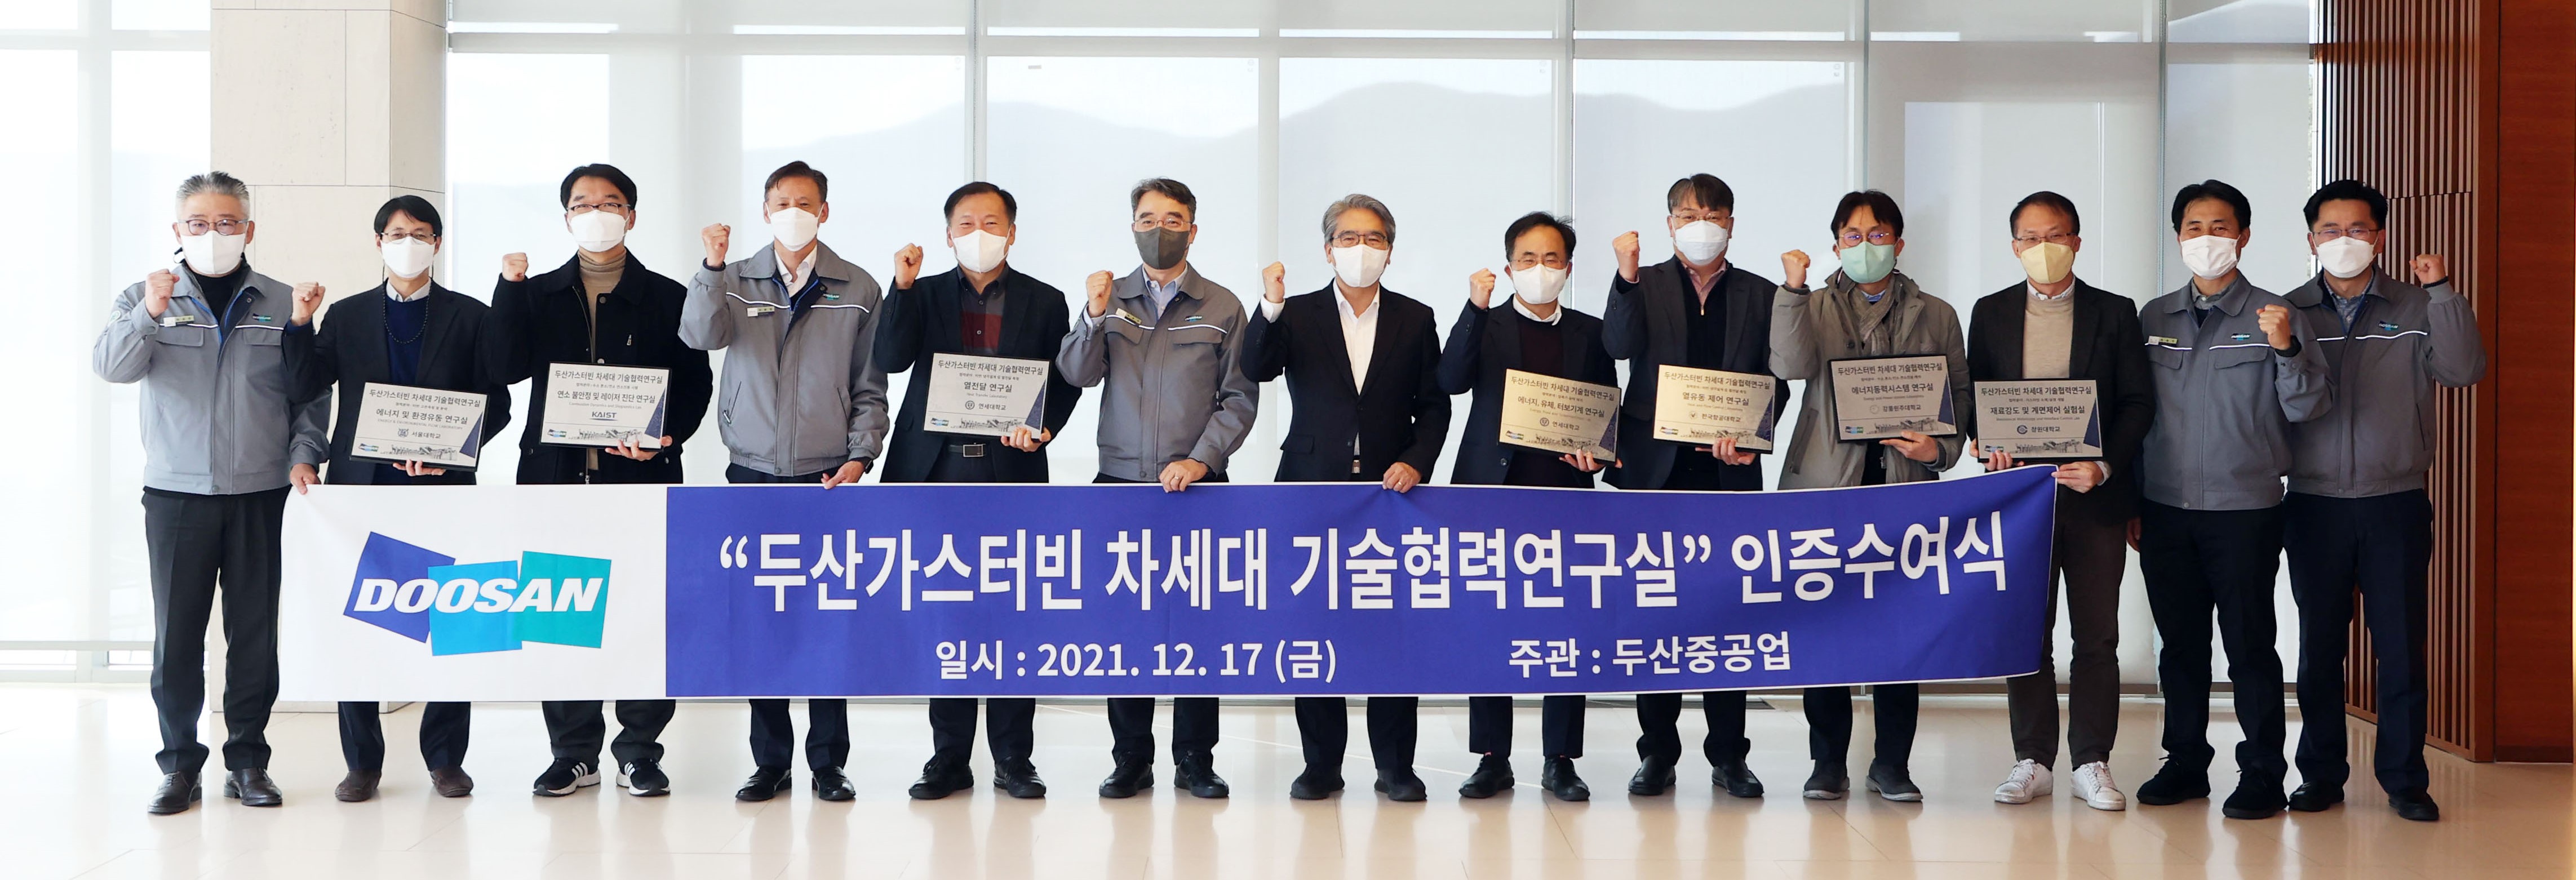 Photo. At the “Doosan Gas Turbine Research Lab for Next Generation Technology Cooperation” certification ceremony, which was held at the Changwon headquarters on Dec. 17th, Hongook Park, CEO of Doosan Heavy’s Power Services BG (sixth from the left); Jeong-rak Son, Energy Managing Director of the MOTIE’s Office of Strategic R&D Planning (seventh from the left) and professors from the local universities pose for a group photo.